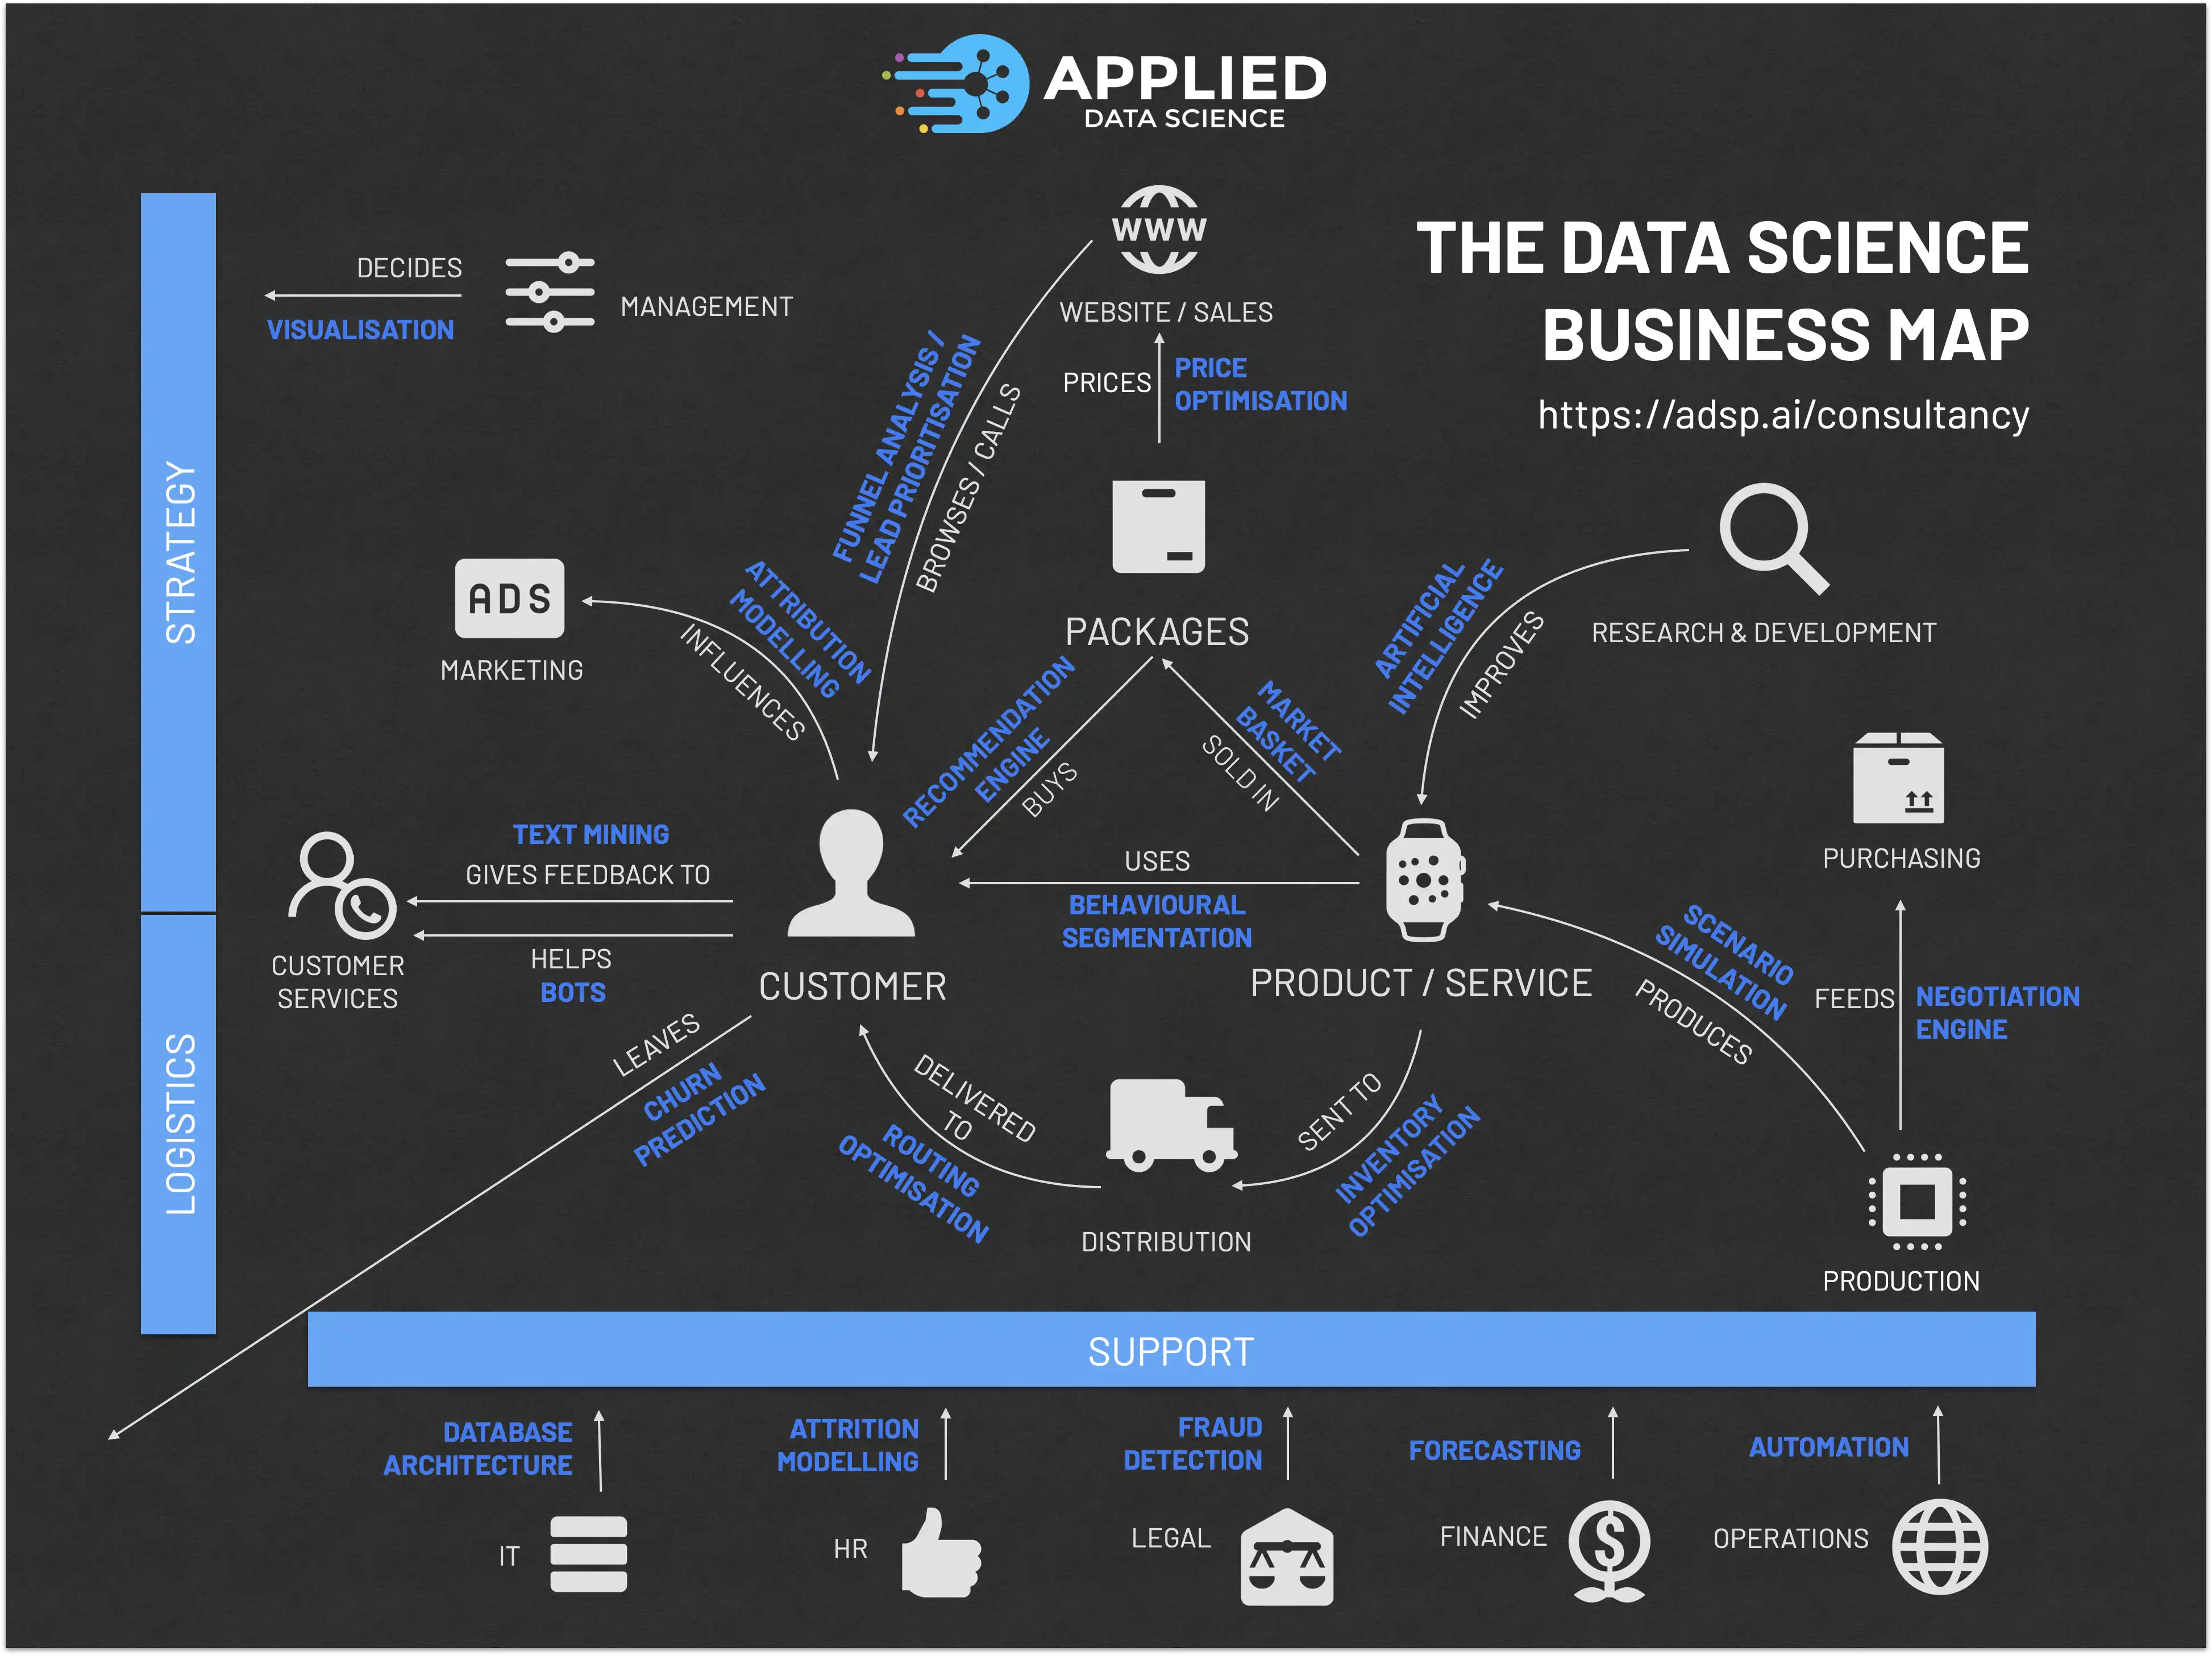 The Data Science Business Map